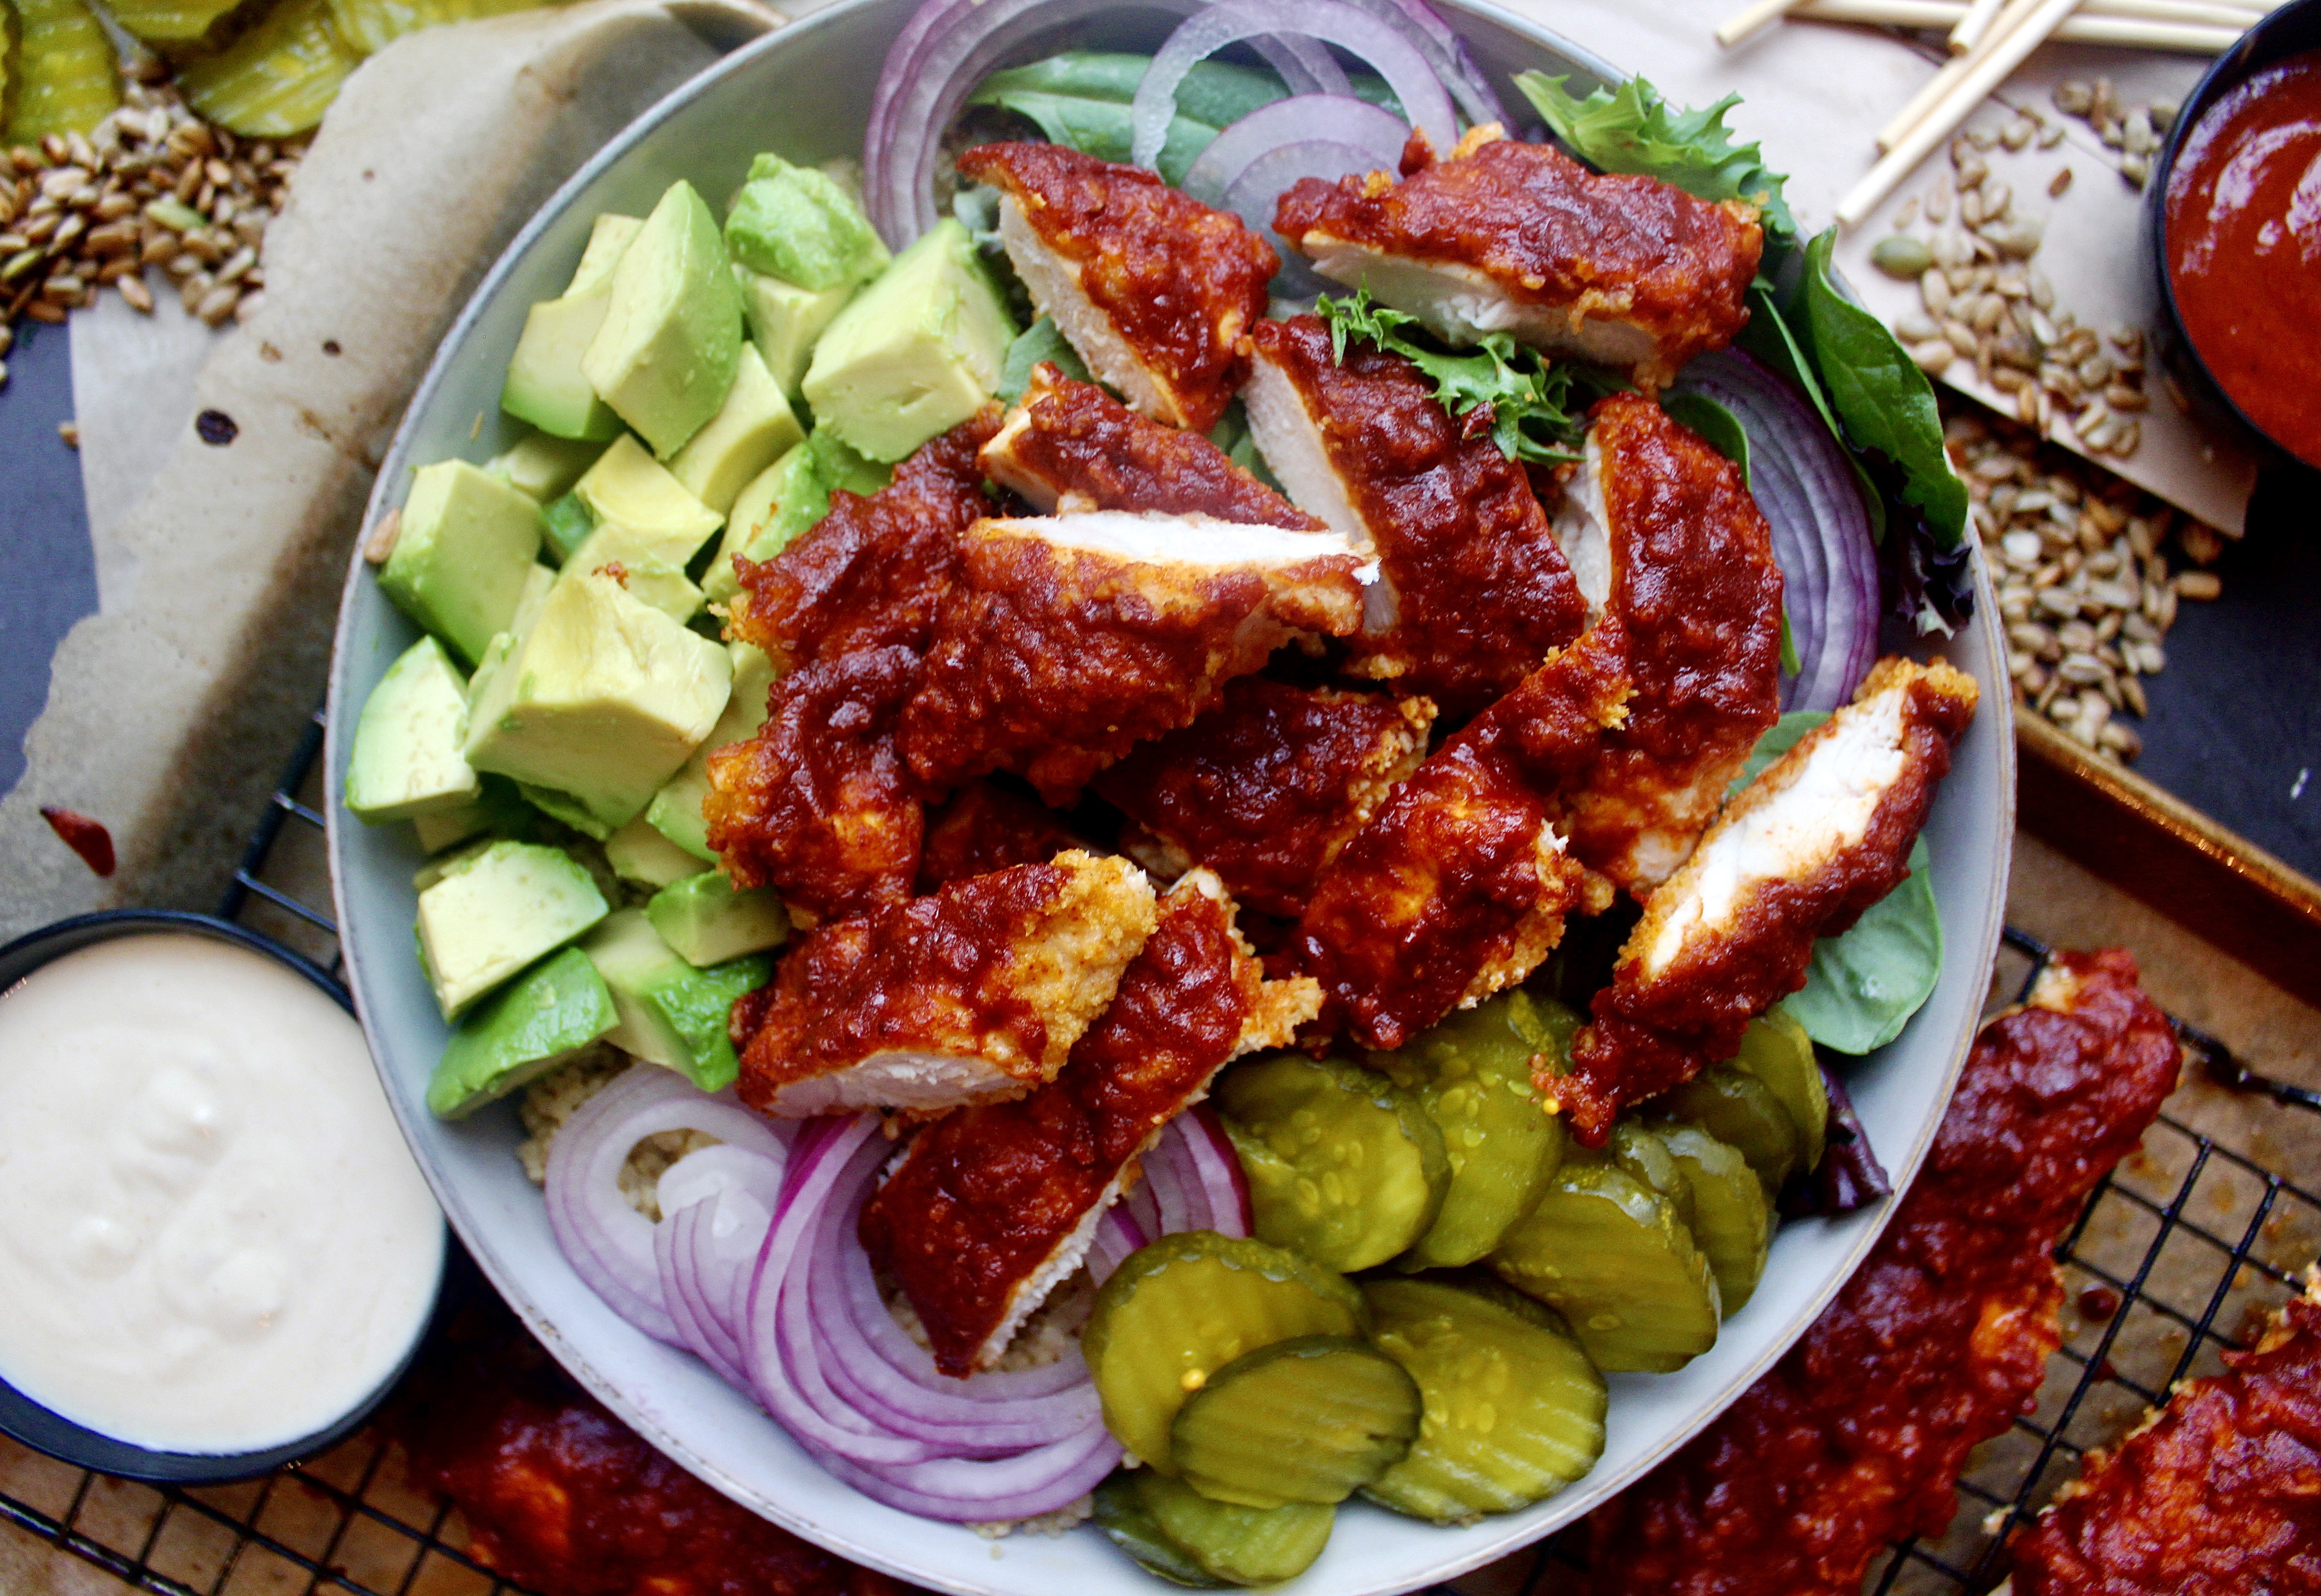 A lighter take on the classic crispy southern chicken all chopped up in a bowl with your fav sweet and spicy toppings: these Healthier Nashville Hot Chicken Bowls are my everything!!